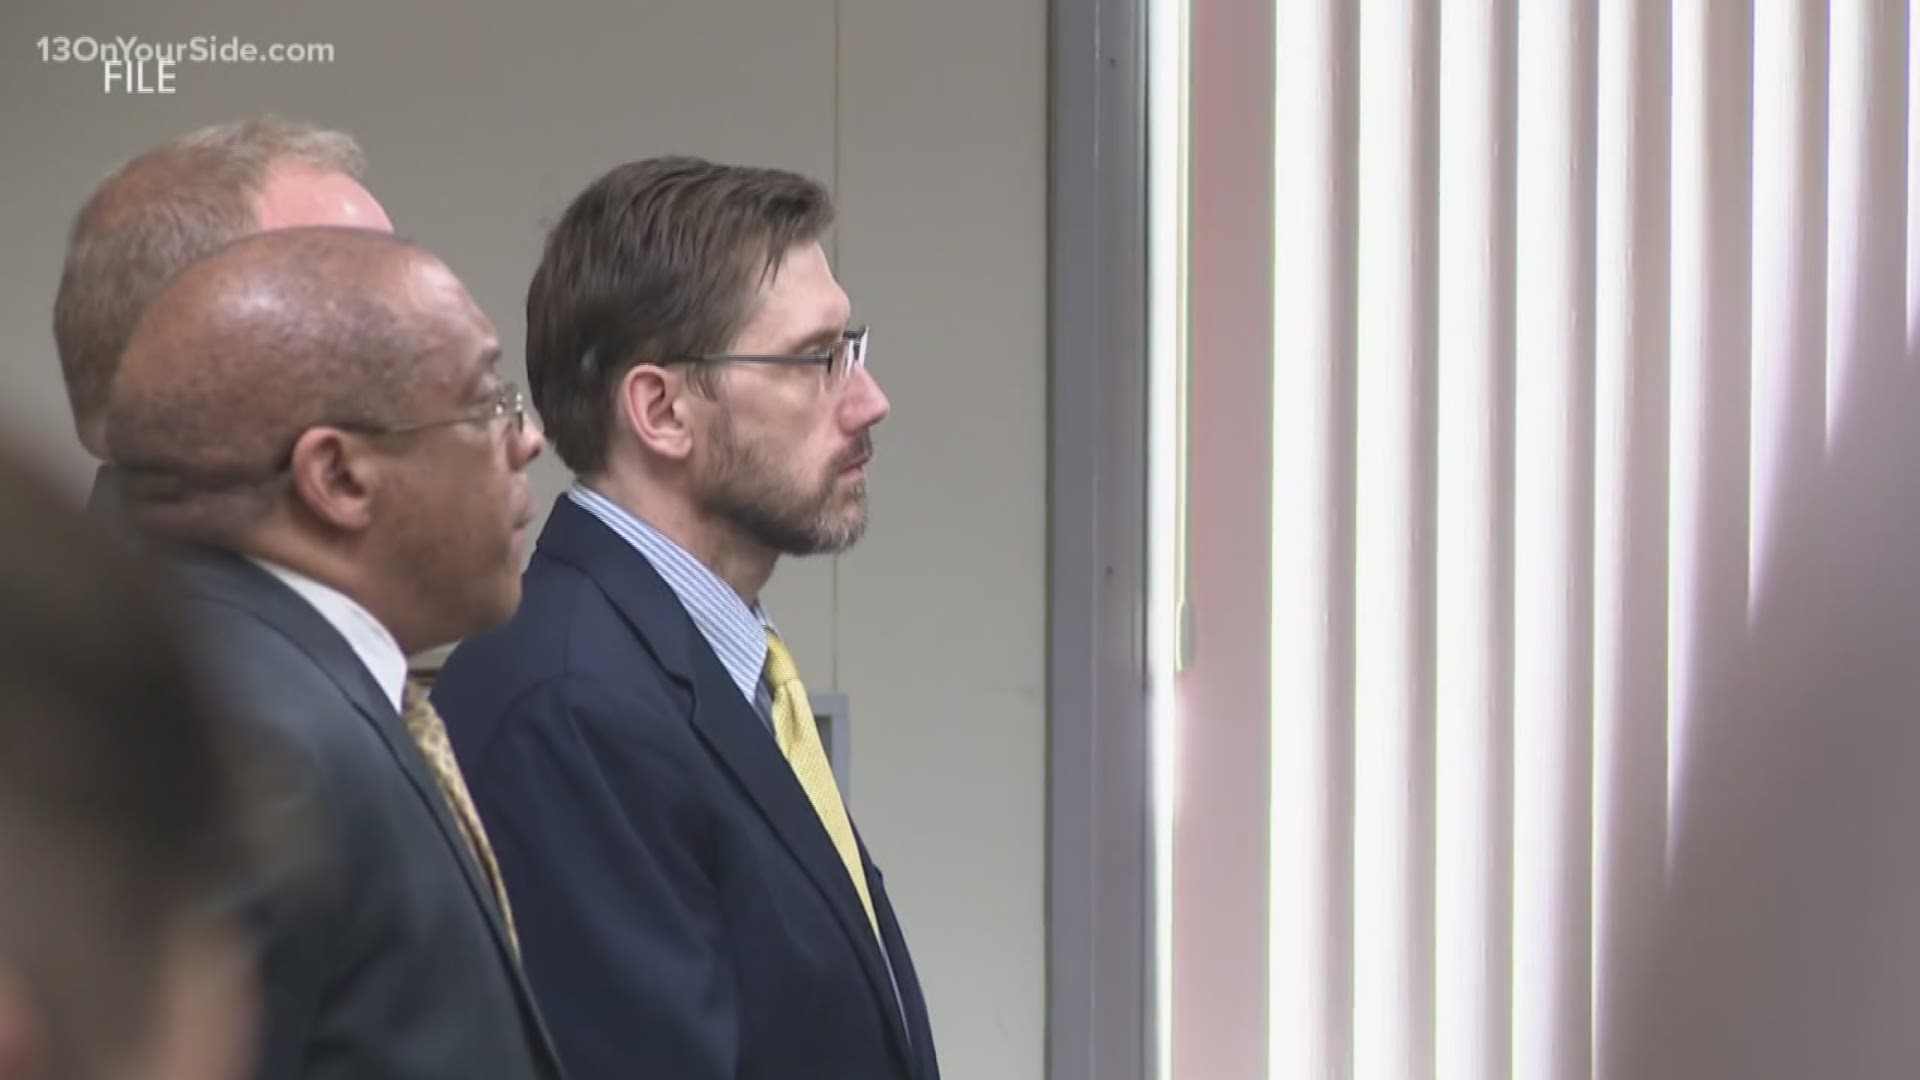 An appeals court upheld Willis's first-degree murder conviction in the death of Rebekah Bletsch.